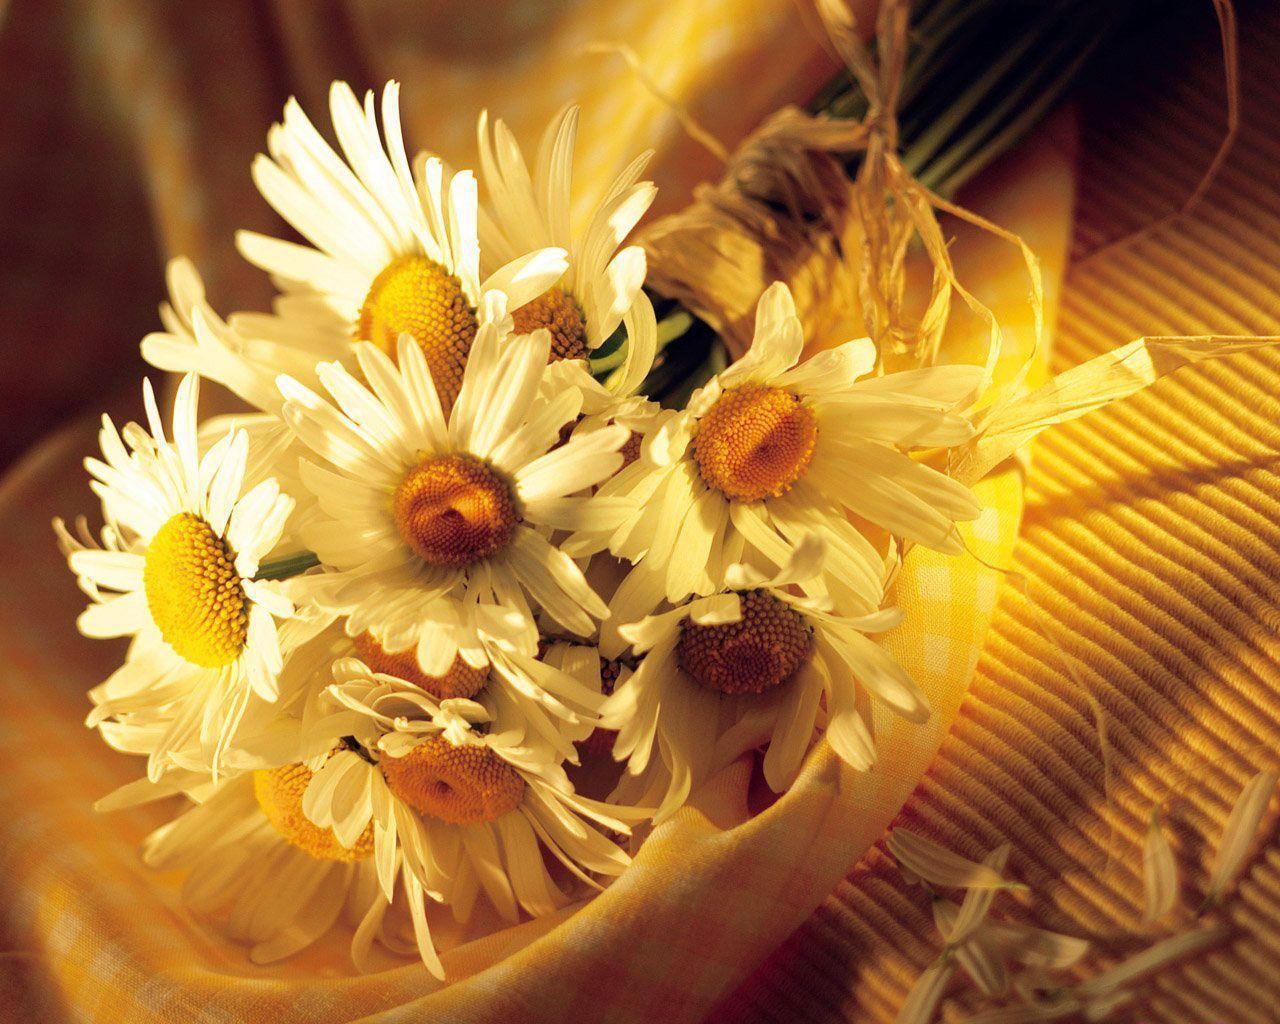 Cool Daisies HD Widescreen Flowers Wallpaper. High Quality PC